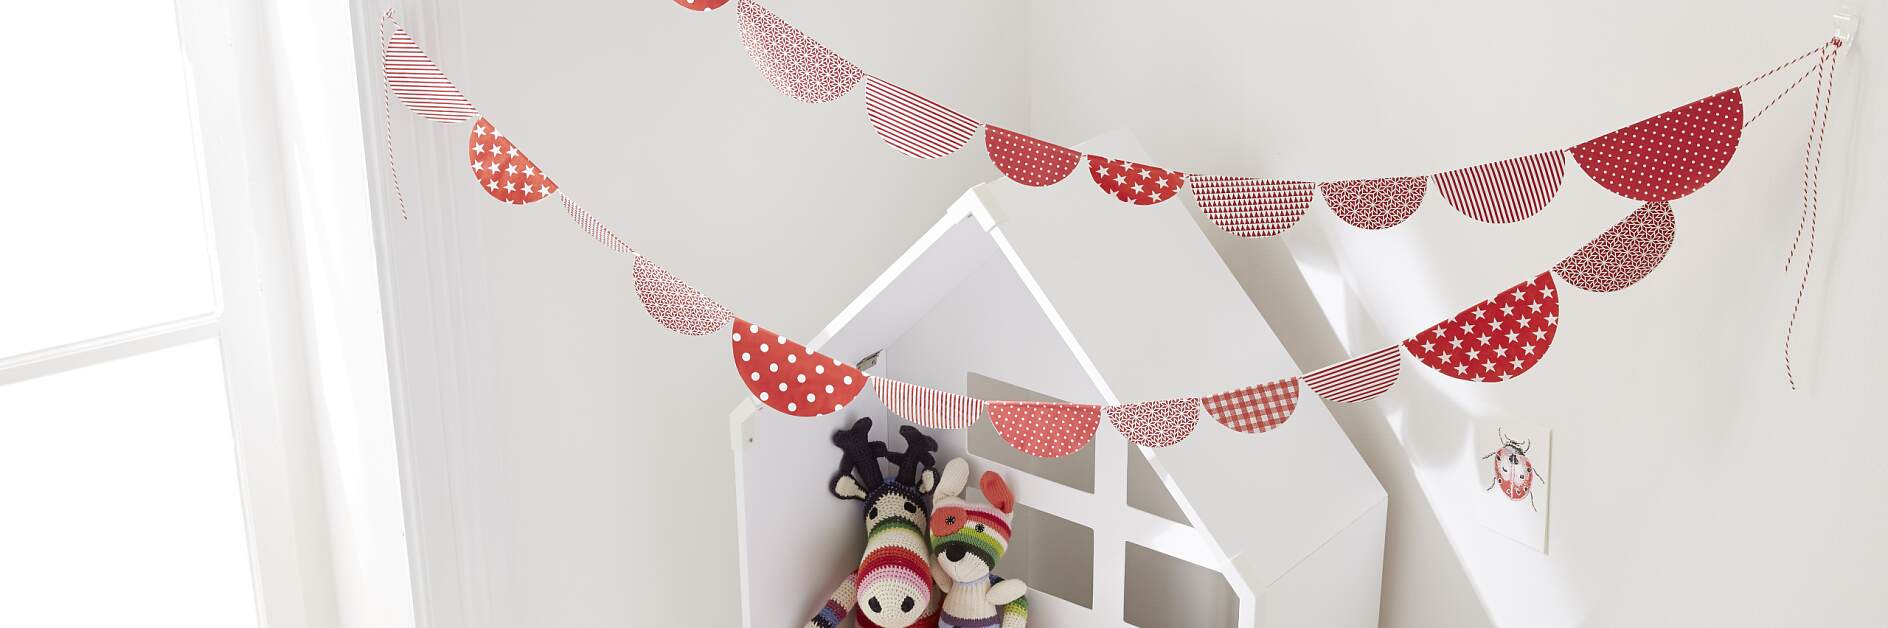 Party decoration: “Paper Garlands”